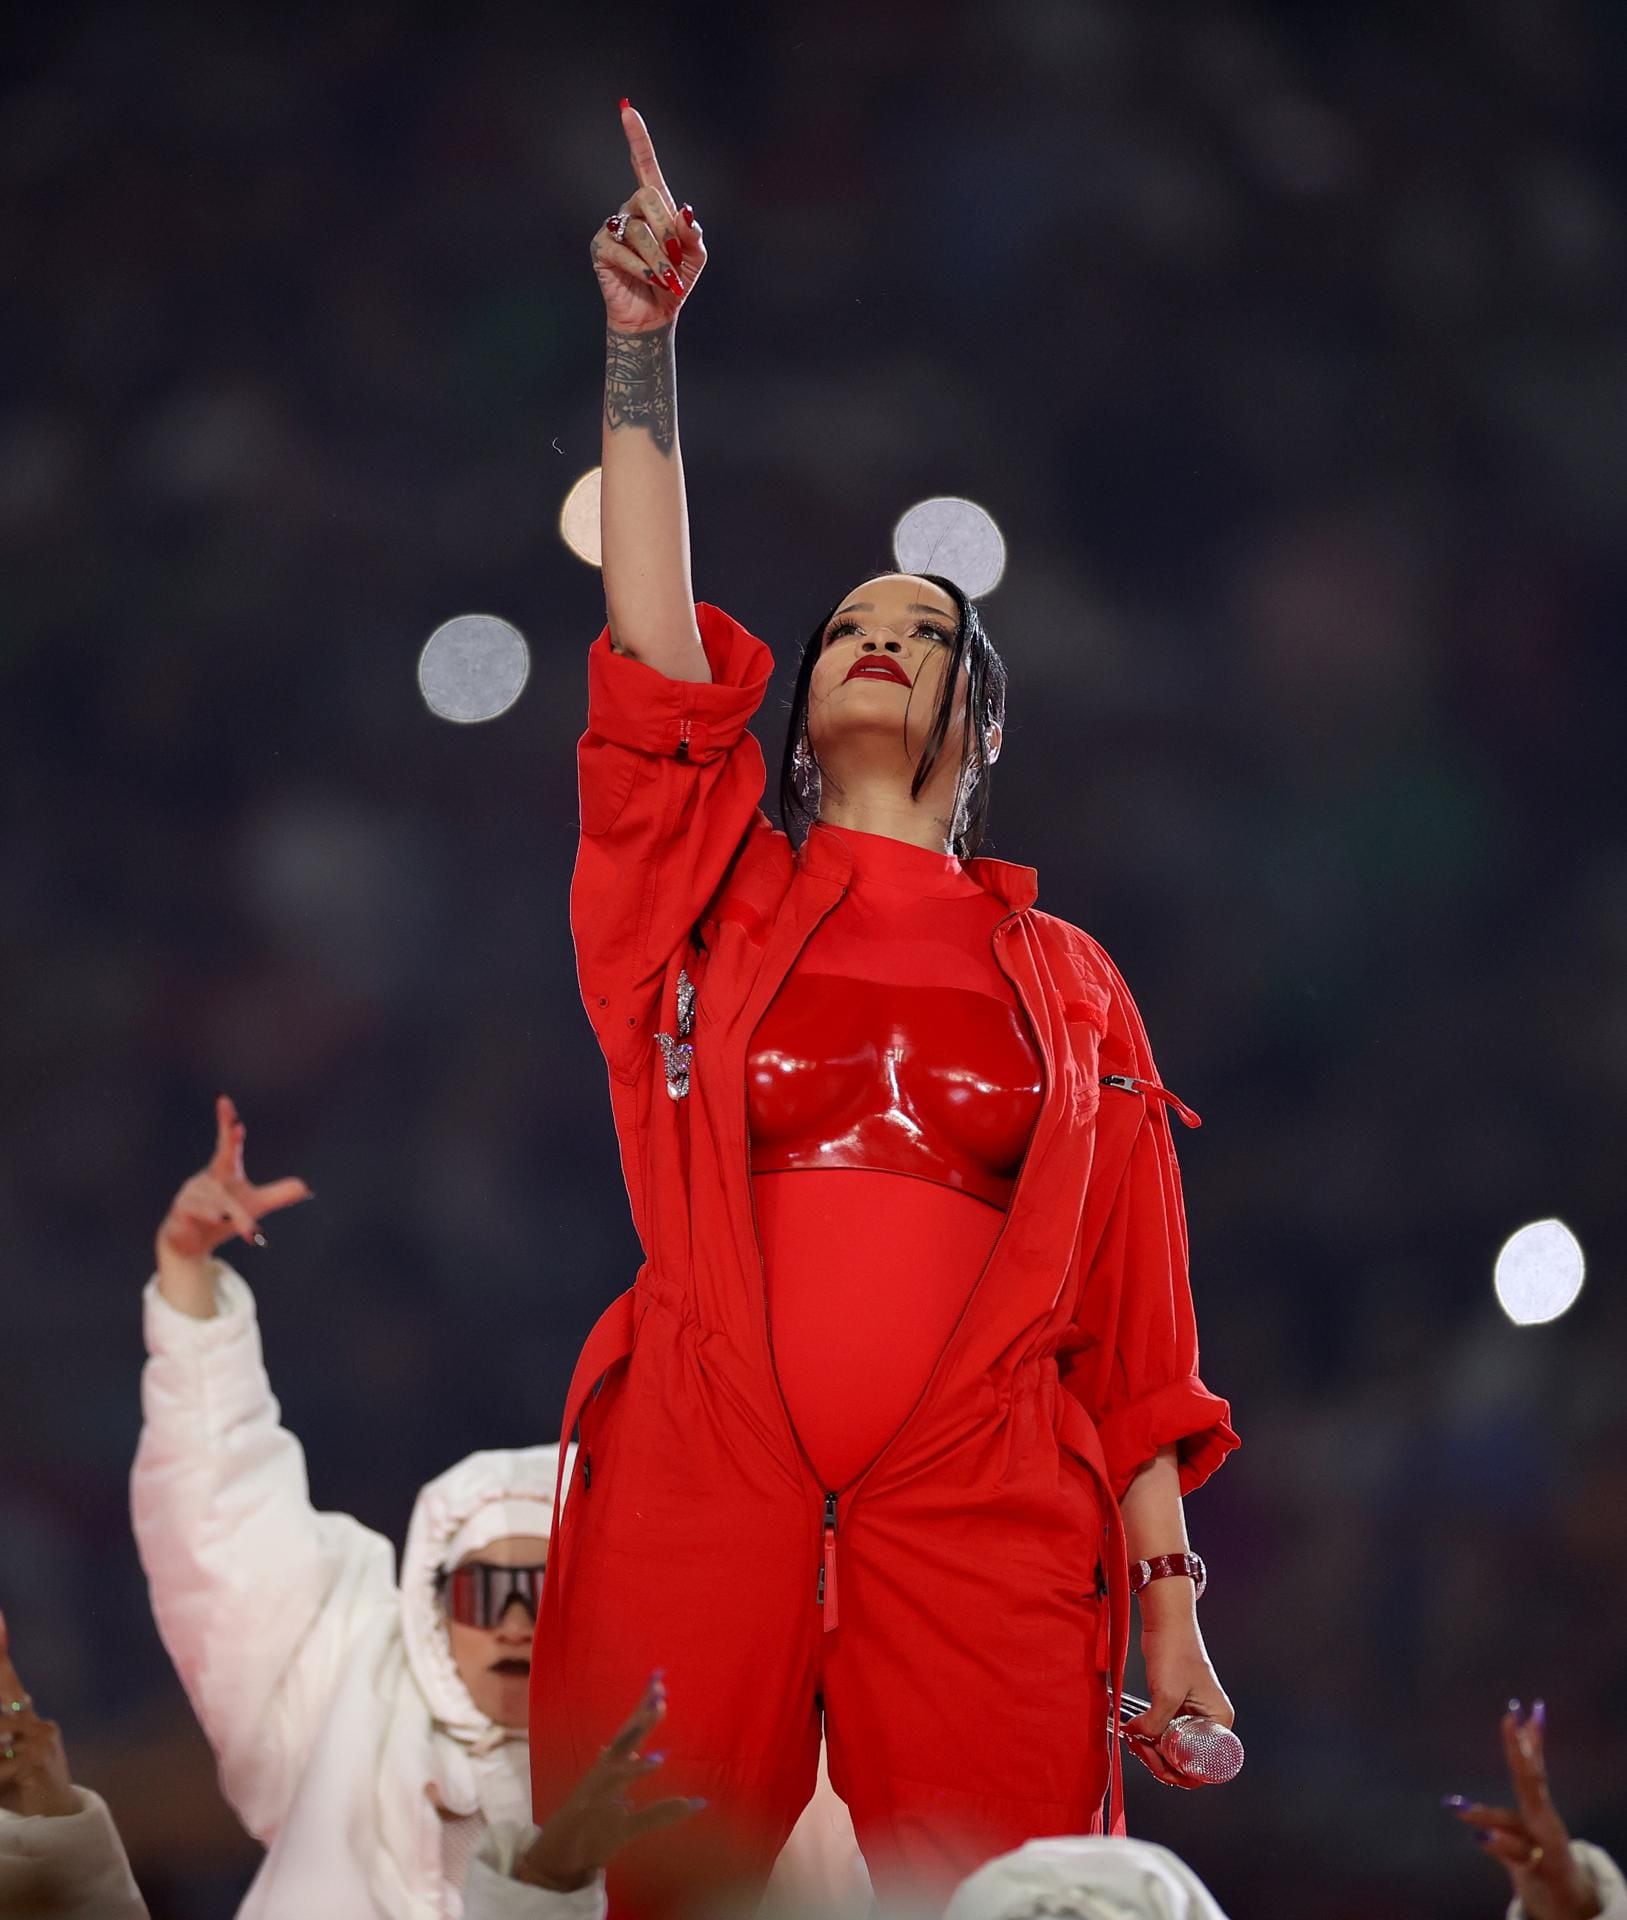 Glendale (United States), 12/02/2023.- Barbadian singer Rihanna performs during halftime of Super Bowl LVII between the AFC champion Kansas City Chiefs and the NFC champion Philadelphia Eagles at State Farm Stadium in Glendale, Arizona, 12 February 2023. The annual Super Bowl is the Championship game of the NFL between the AFC Champion and the NFC Champion and has been held every year since January of 1967. (Estados Unidos, Filadelfia) EFE/EPA/CAROLINE BREHMAN EPA-EFE/CAROLINE BREHMAN
